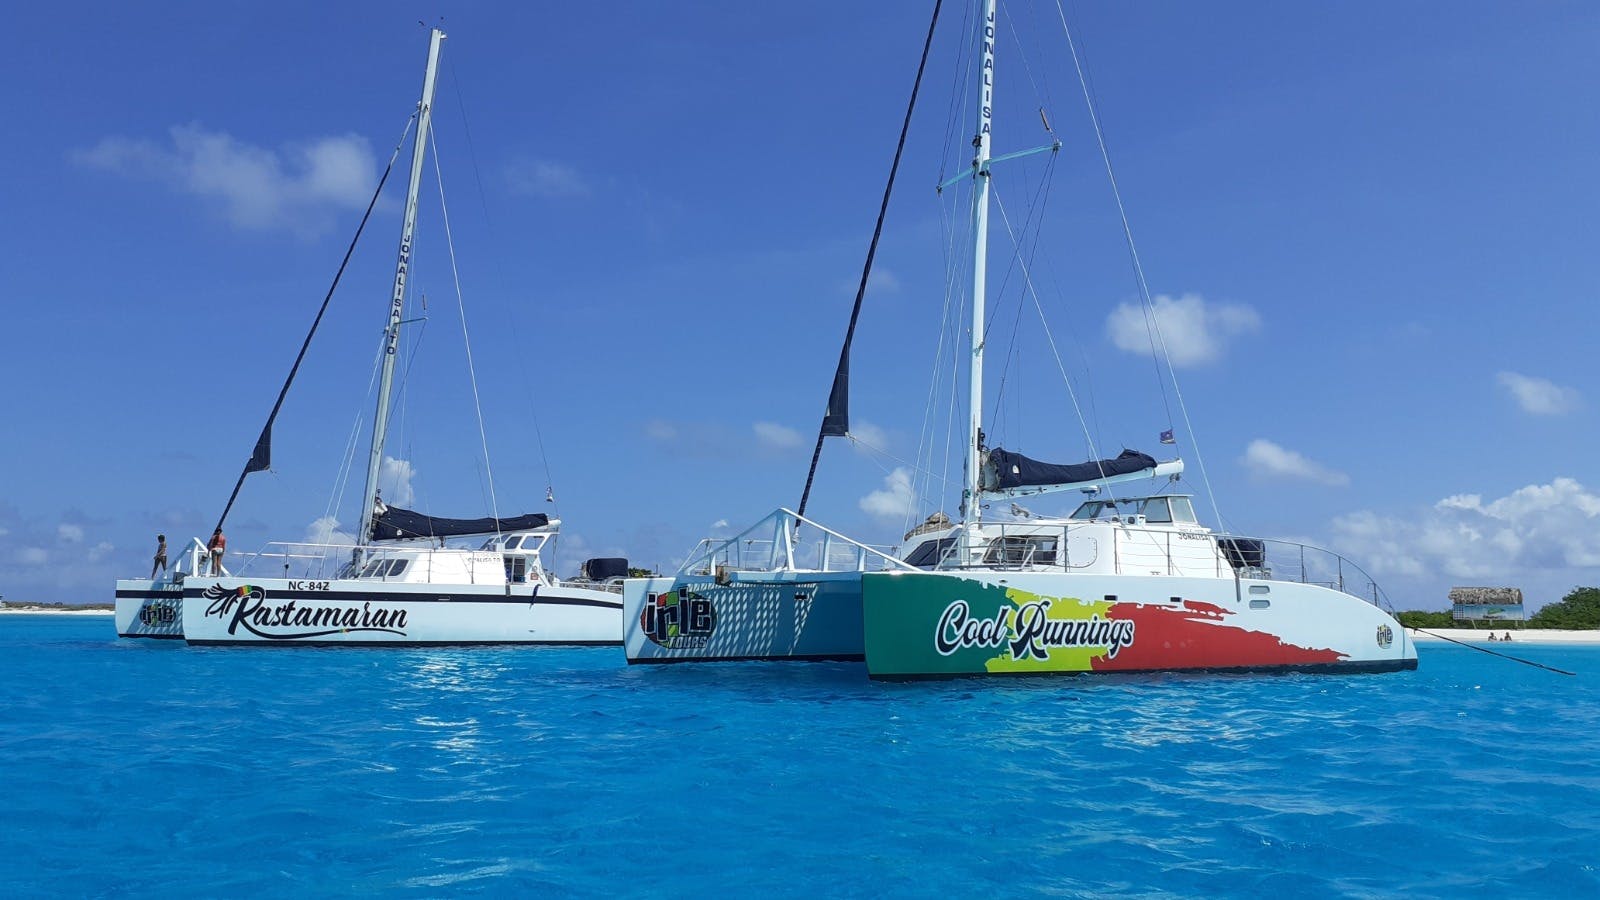 Klein Curaçao catamaran trip including small breakfast and lunch